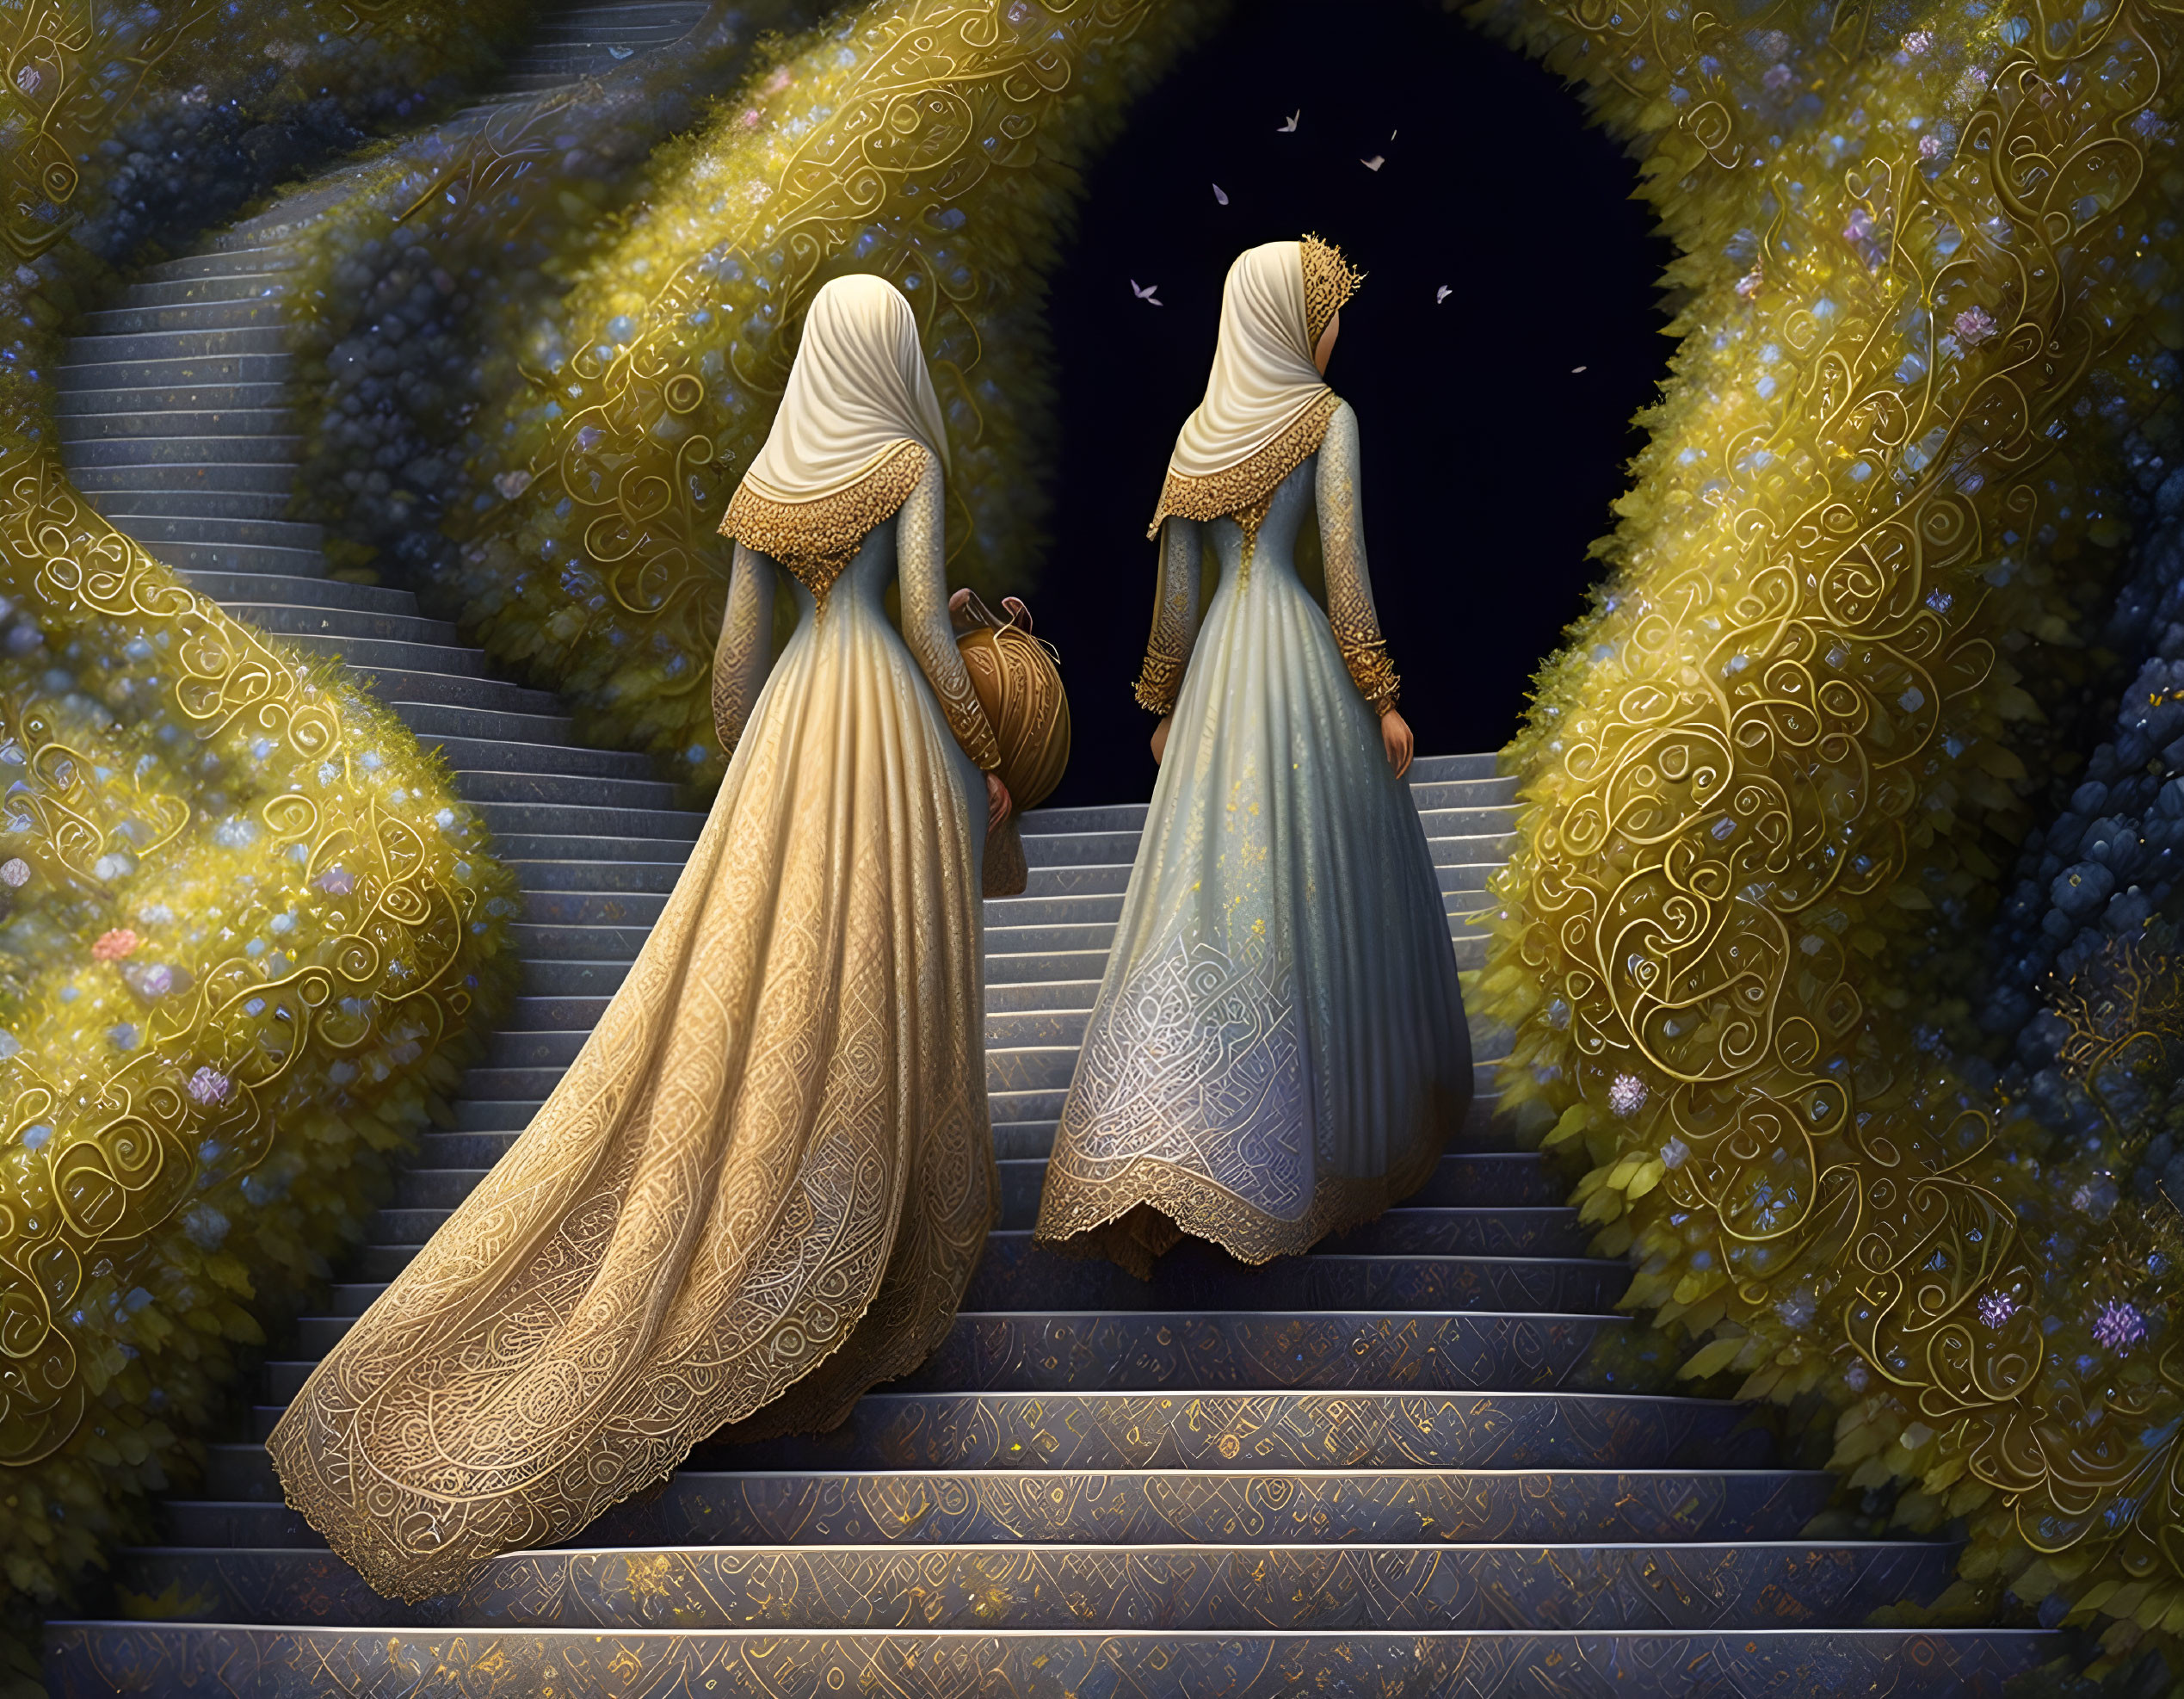 Two women in golden gowns on stairway with pot, starry backdrop, and floral arches